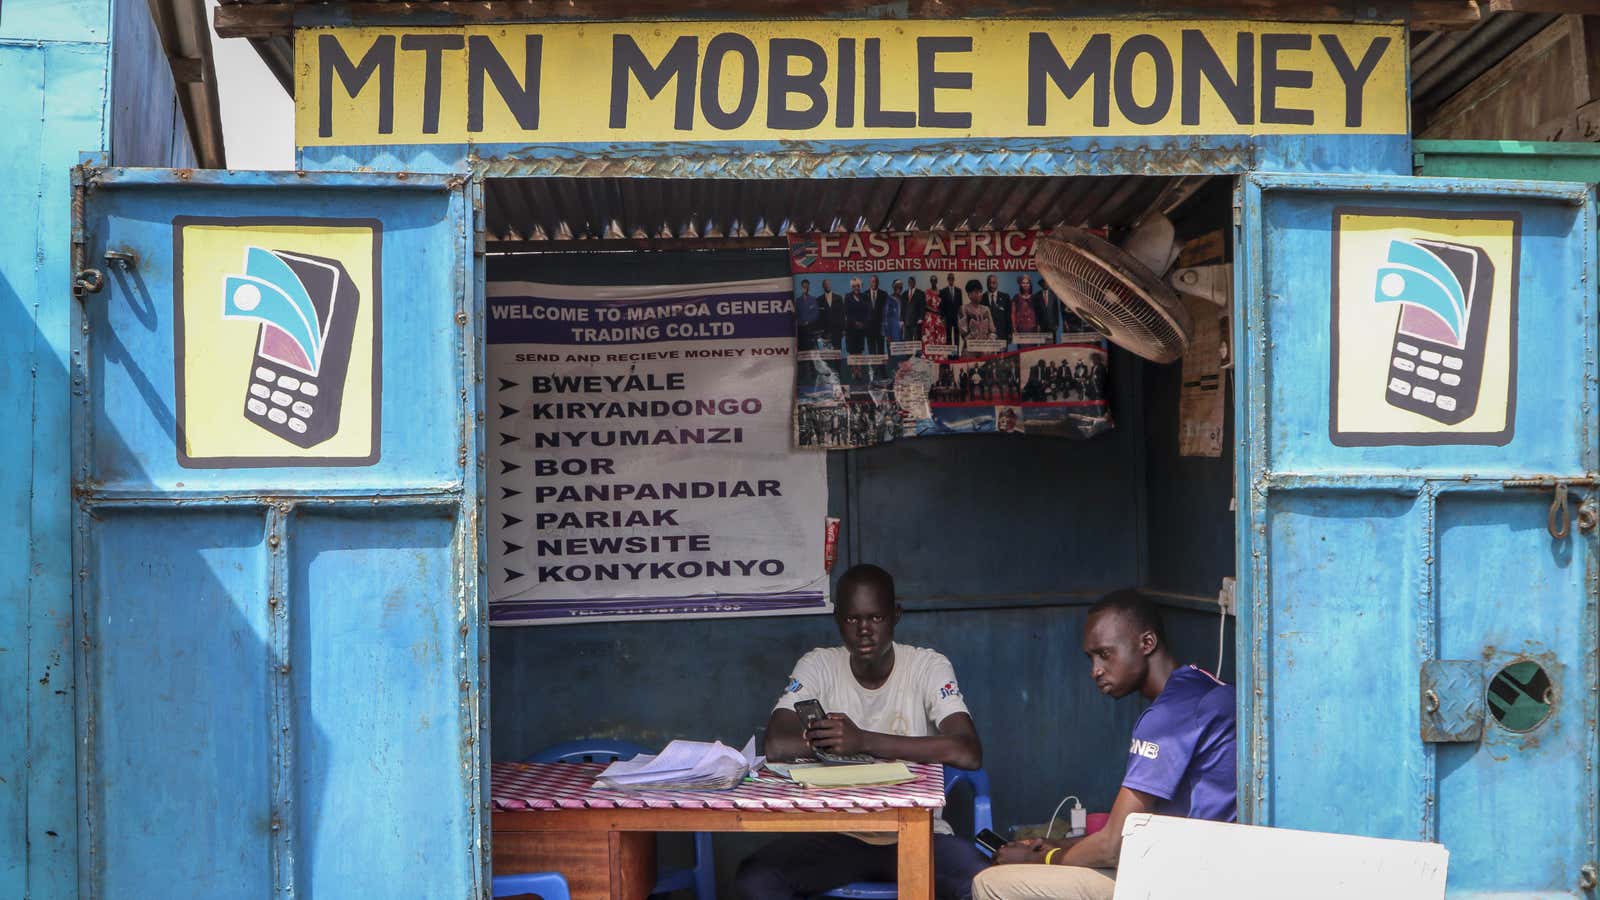 A mobile money kiosk which specializes in sending money from South Sudan to Uganda, in Juba, South Sudan.